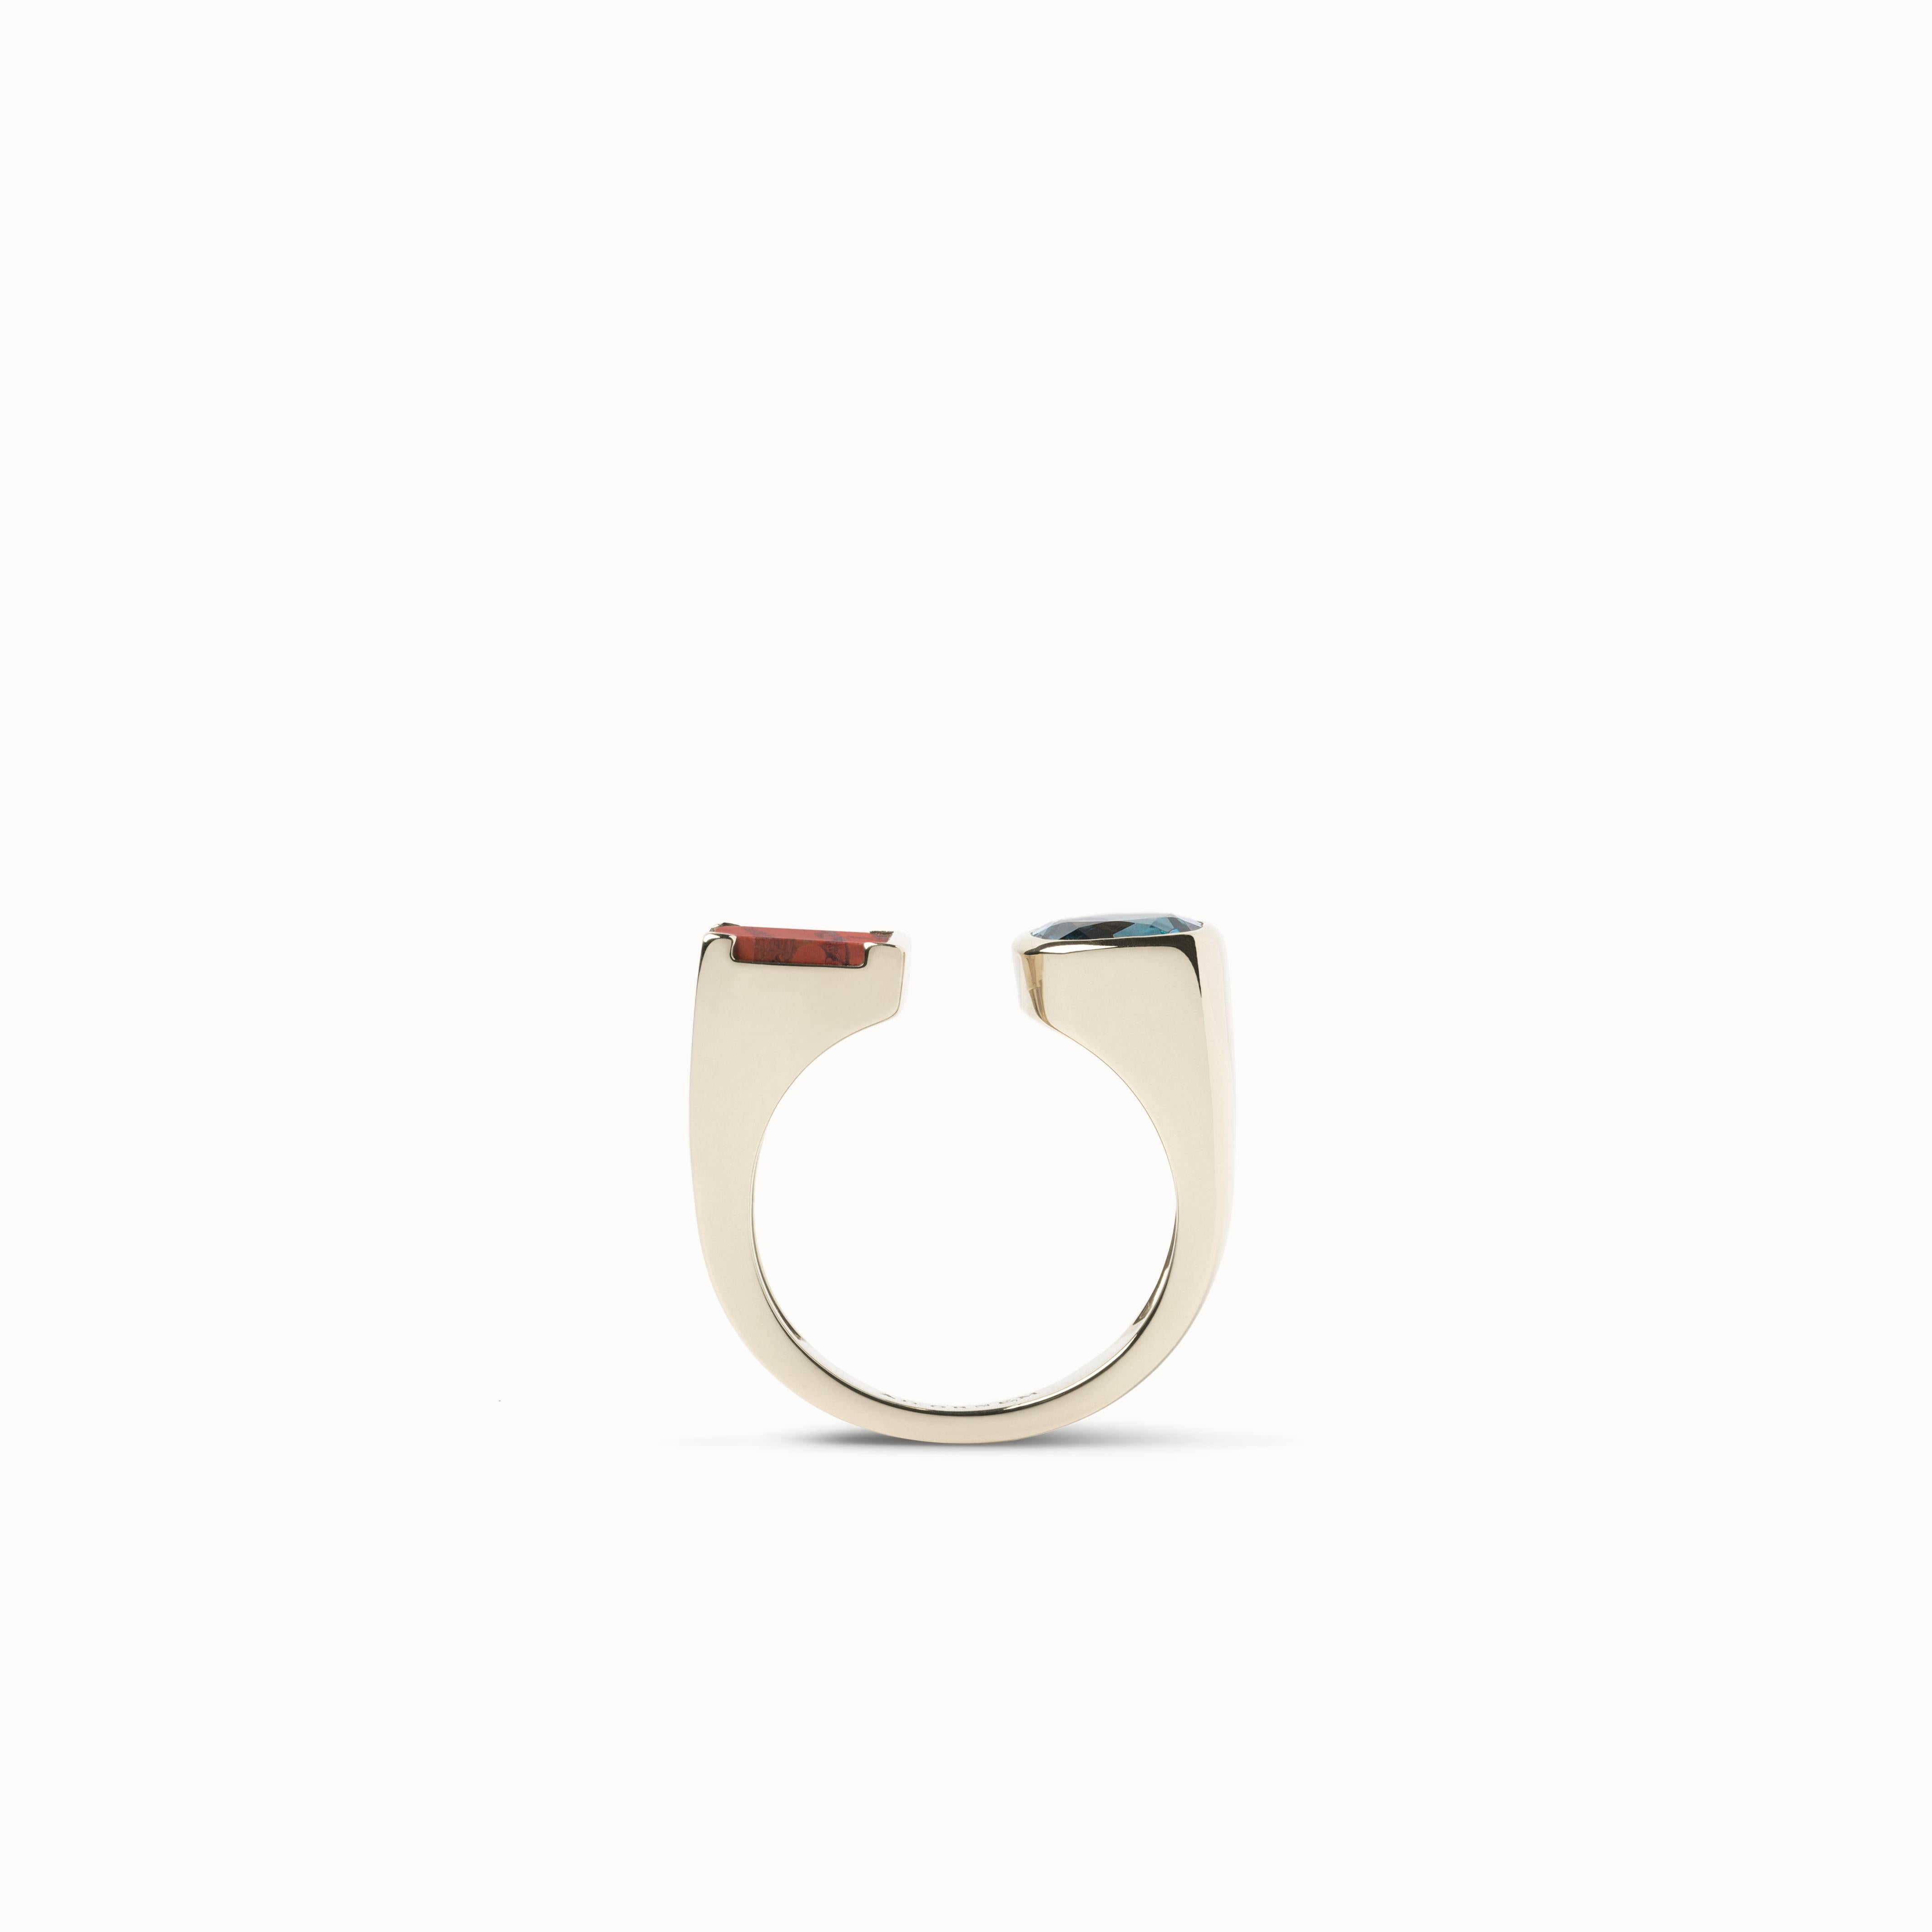 NOS RING

NOS is our jewel metaphor for love, as a modern rework of the traditional « Toi & Moi » ring.

The inner duality of this style is enhanced by an asymetrical design and daring associations of cristalline and ornamental stones, which are